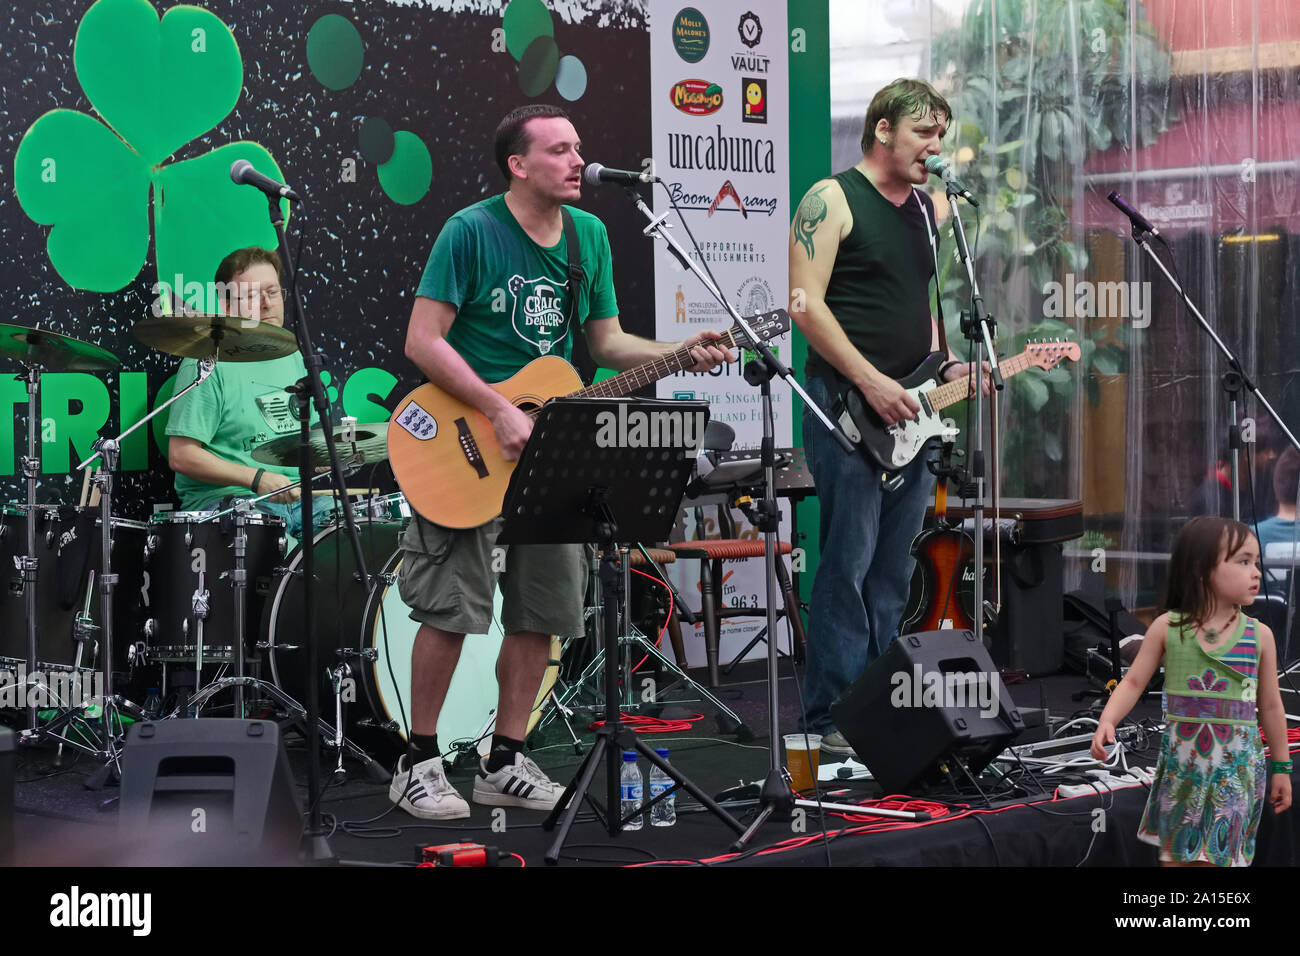 On the occasion of St. Patrick's Day, an Irish band plays at a small open-air event in Singapore, attended largely by Irish expats Stock Photo